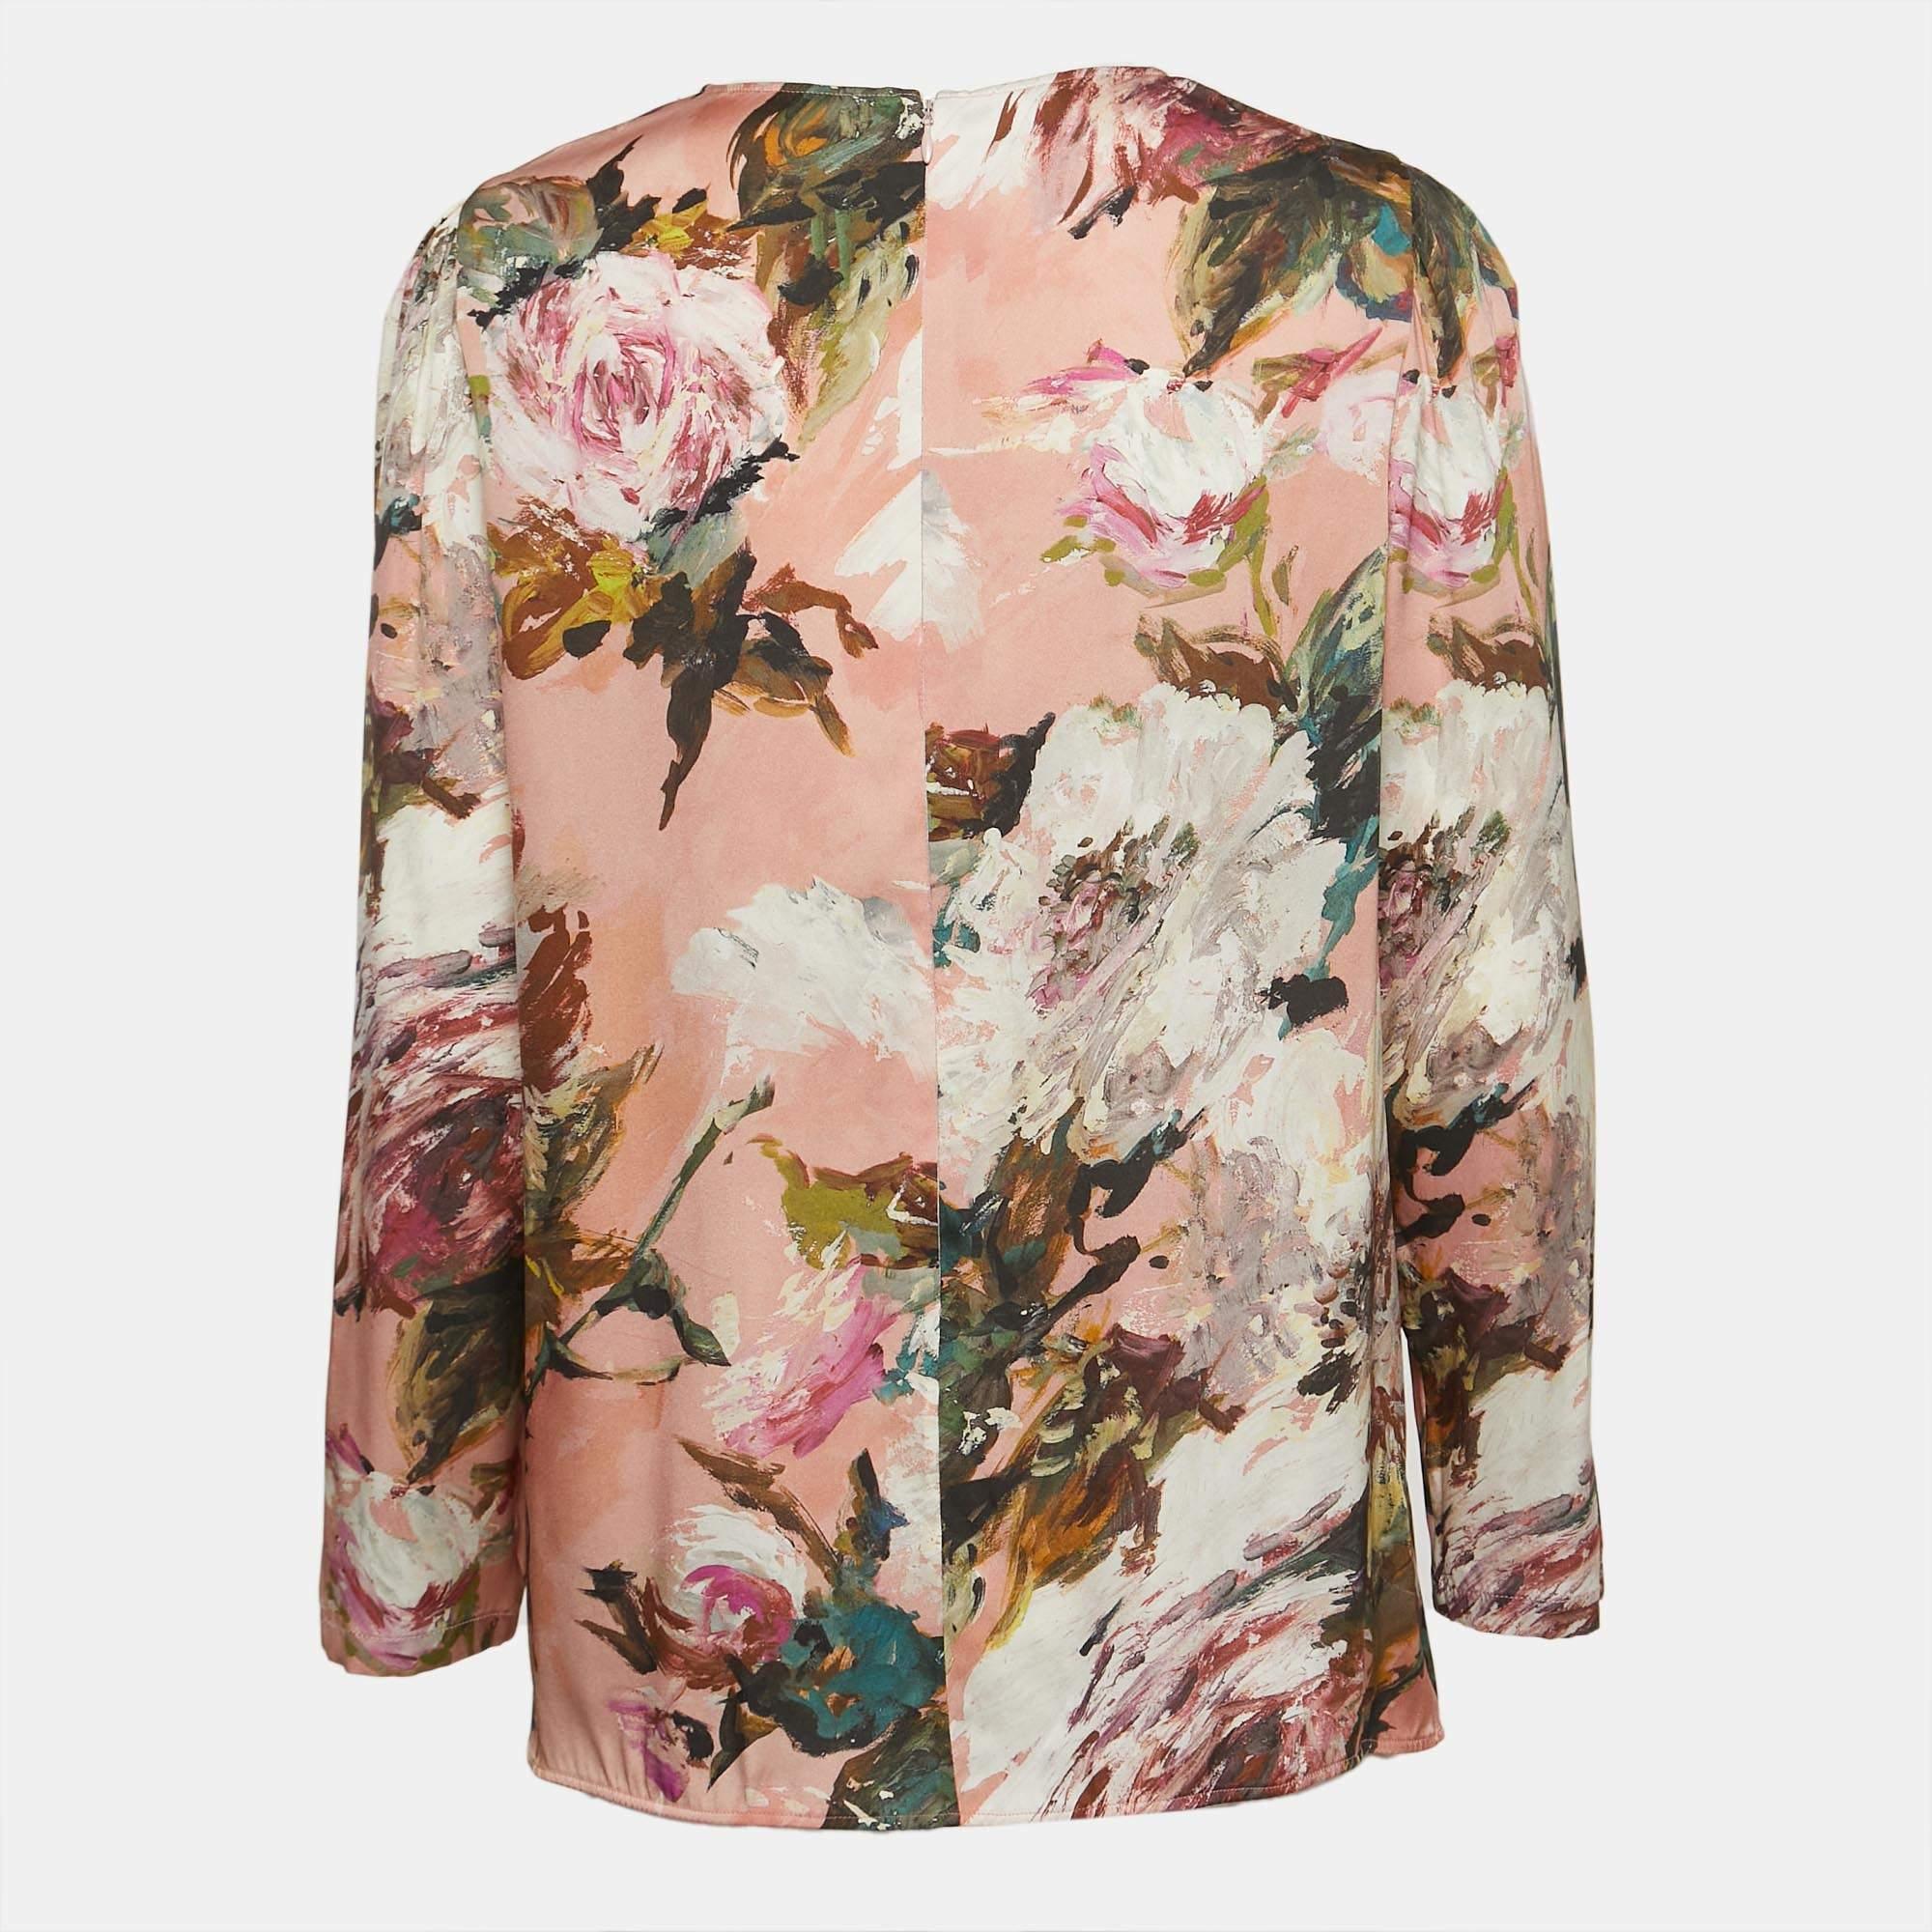 Complement your elegance with a lovely blouse like this one. With its pretty design and prime quality fabric, this blouse is the best pick to look sophisticated and poised.

